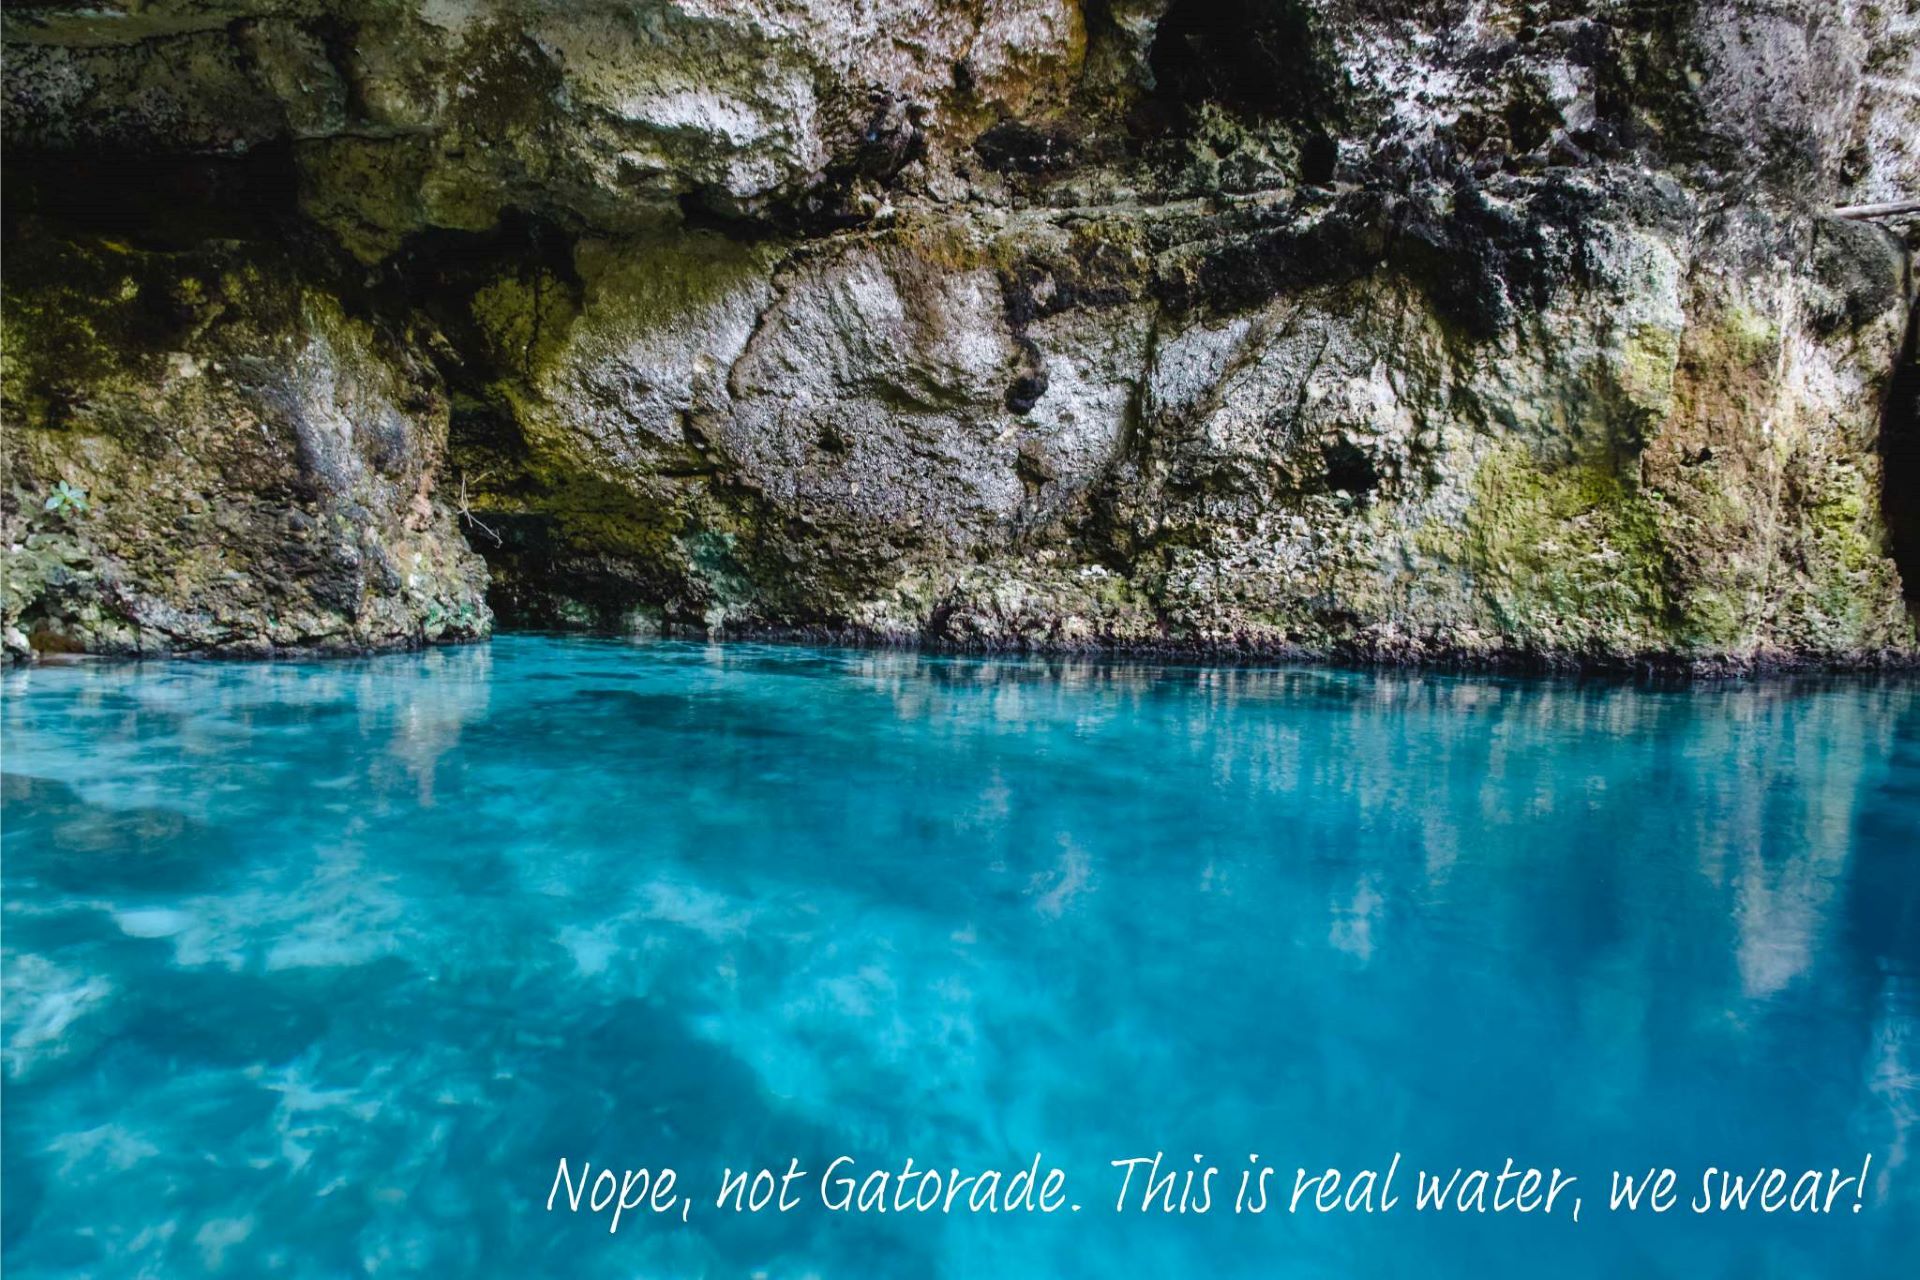 The inside of Hoy Azule, a cenote with bright blue water in the Dominican Republic.